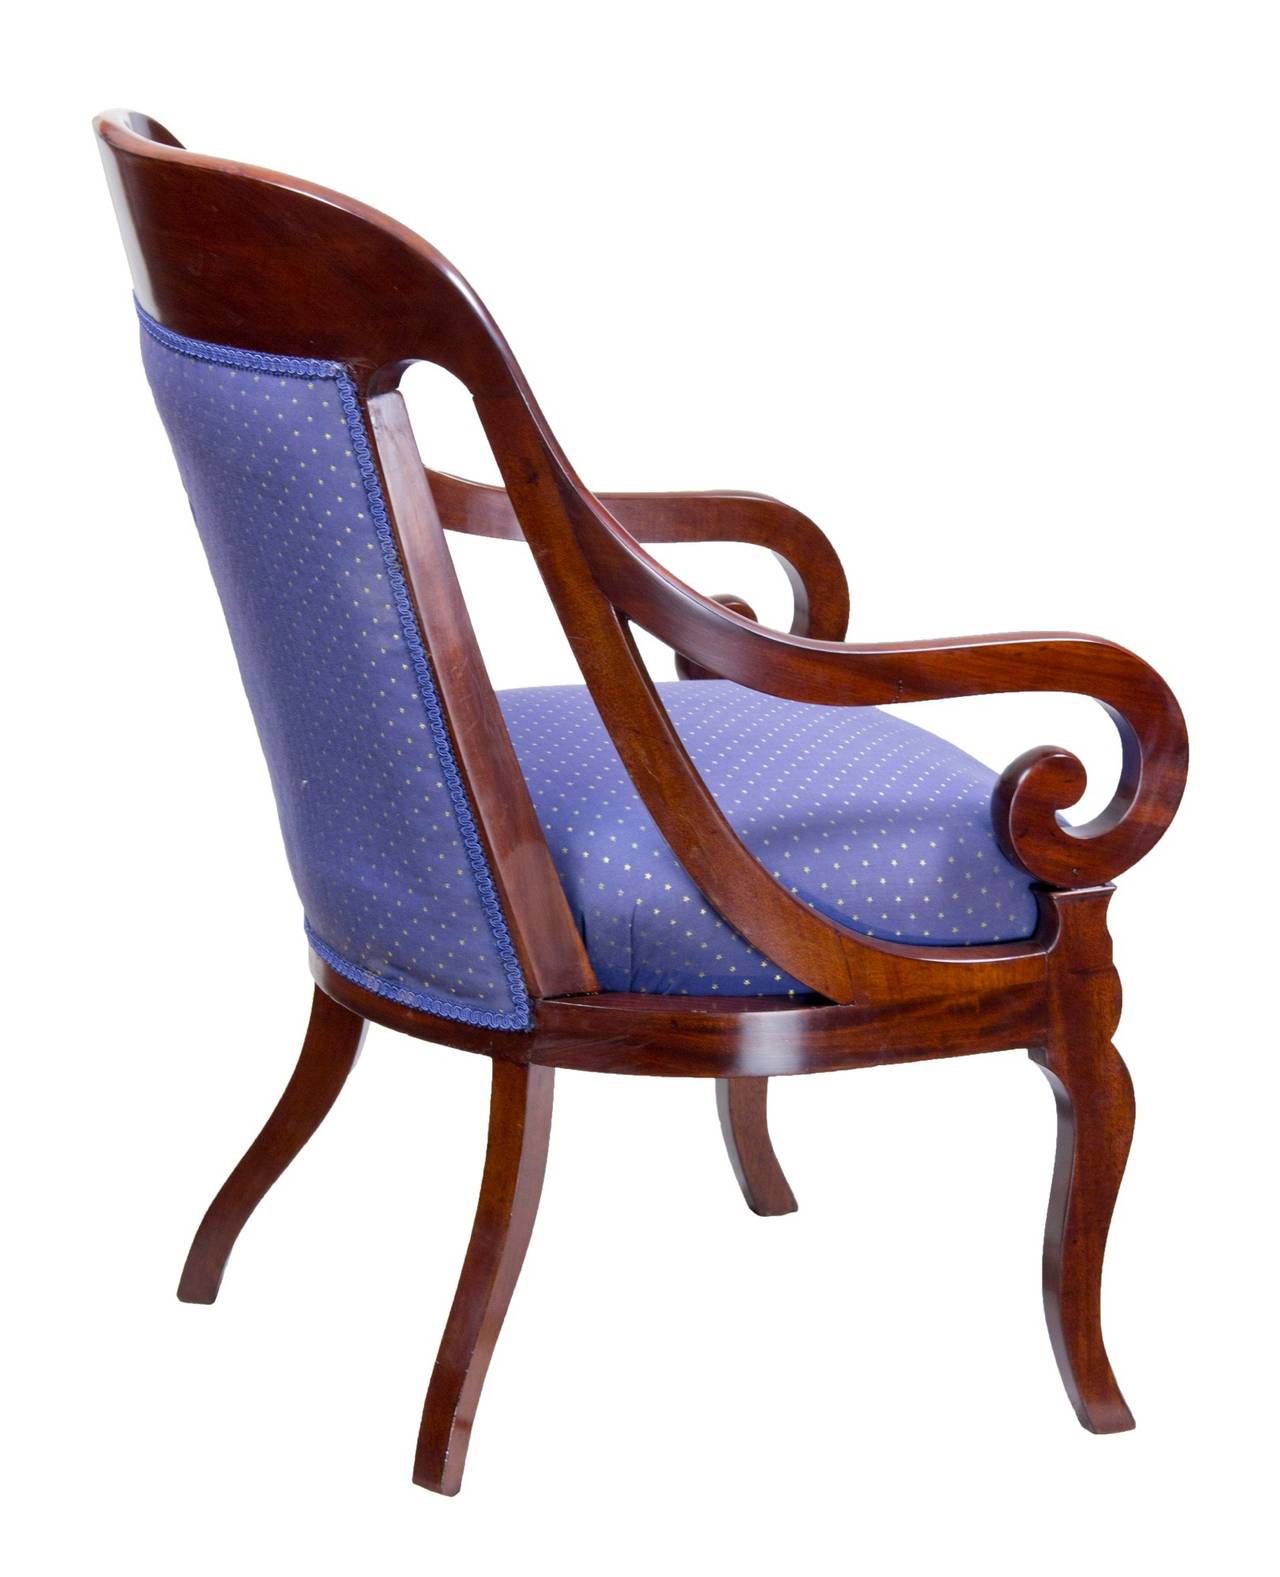 This is a commodious and comfortable armchair. The style is superb with scrolled arms and additional side supports that taper into the front arm supports. The rear legs have a beautiful splay and the figured mahogany apron below the seat is bow